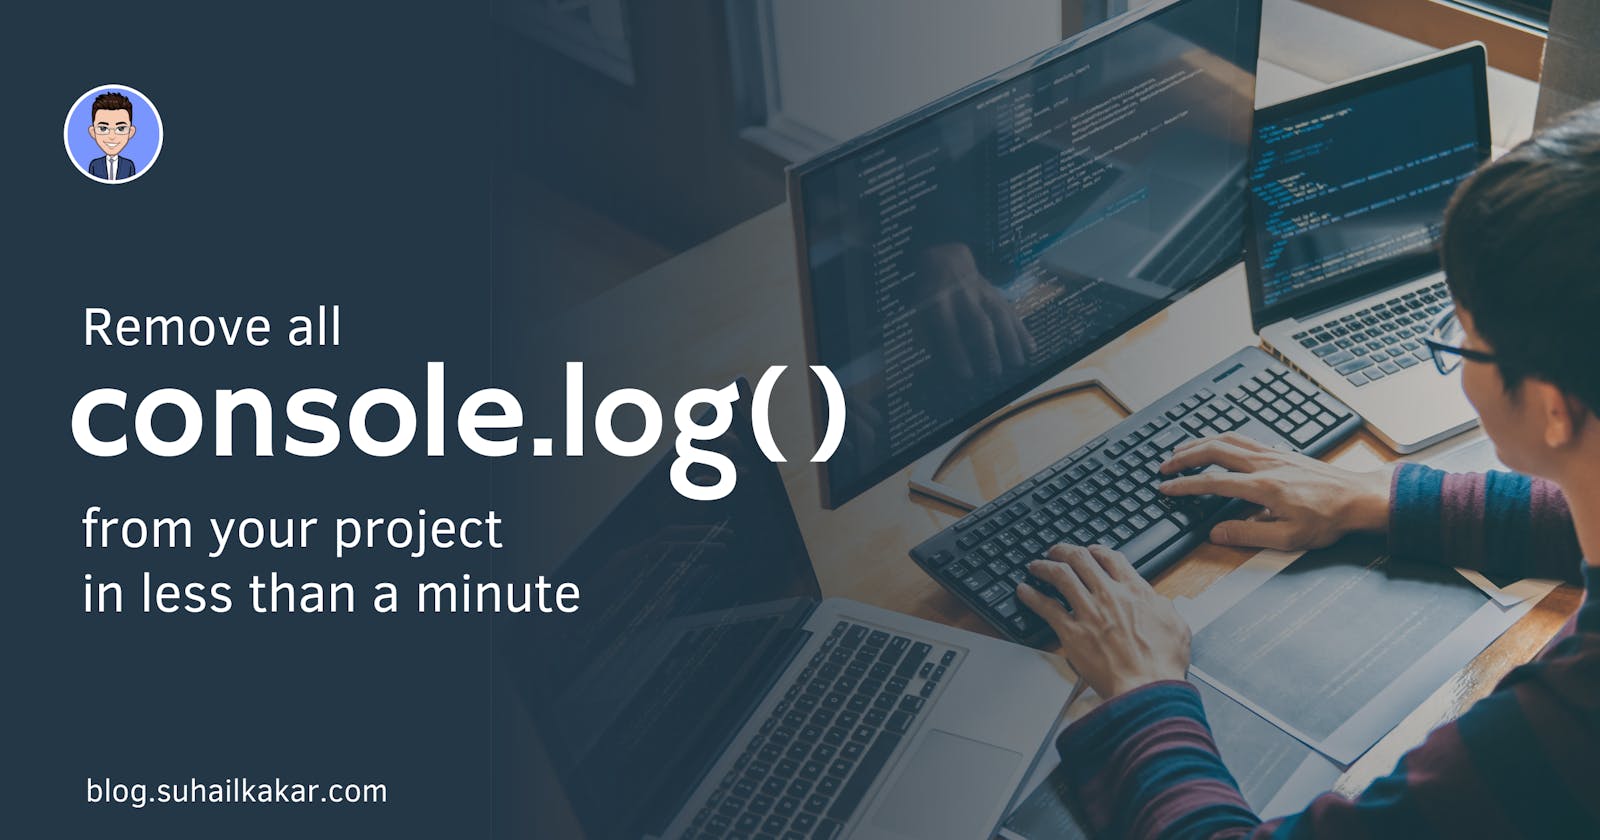 Remove all console.log() from your project in less than a minute